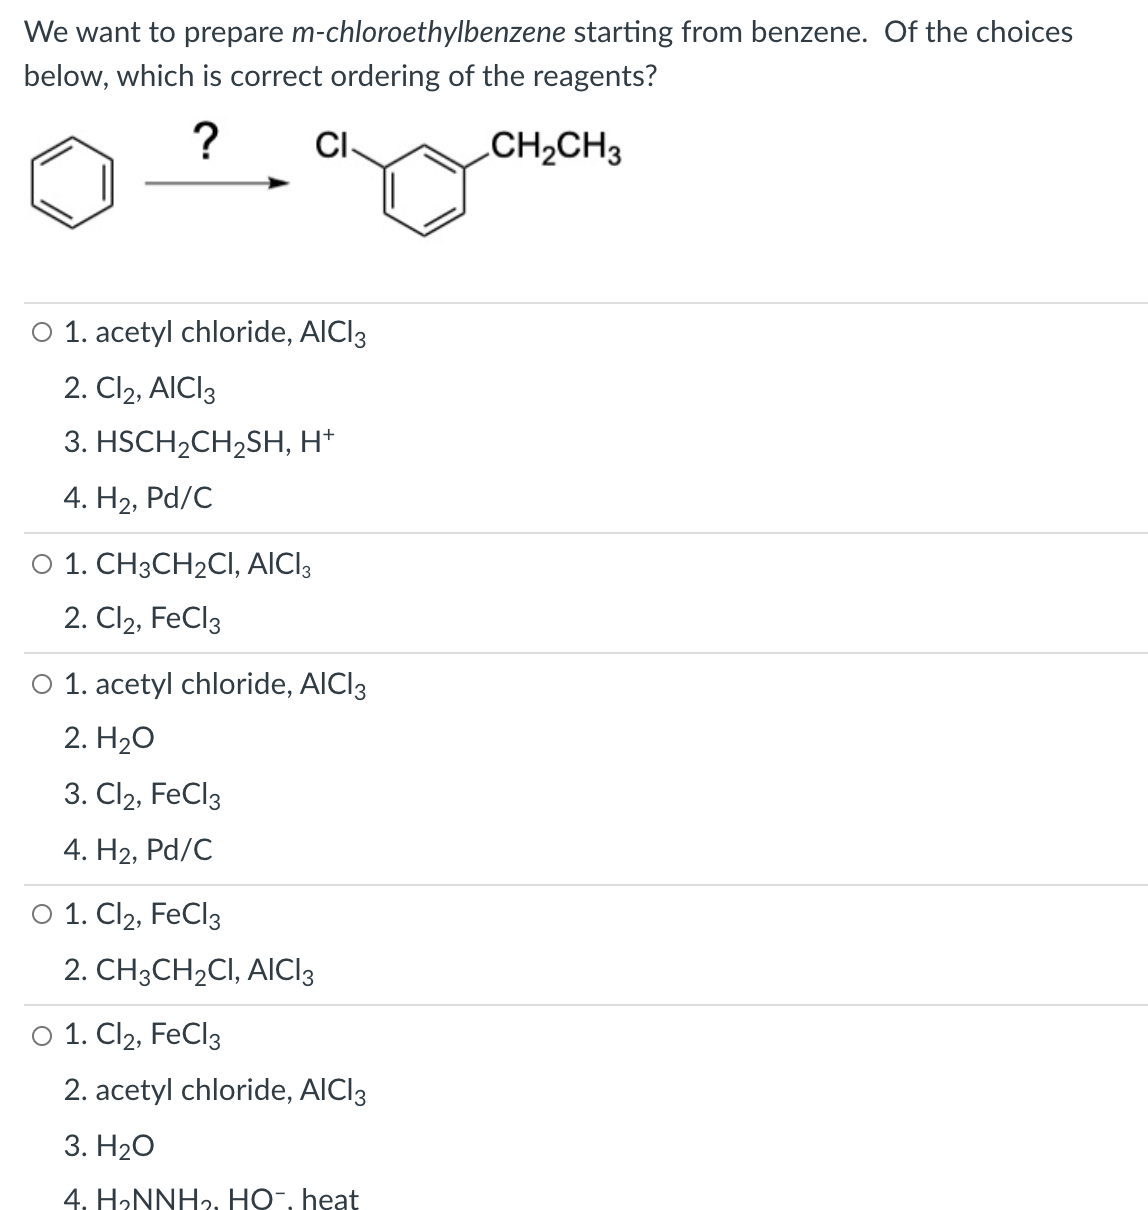 We want to prepare m-chloroethylbenzene starting from benzene. Of the choices
below, which is correct ordering
the reagents?
?
CI-
CH2CH3
O 1. acetyl chloride, AICI3
2. Cl2, AICI3
3. HSCH2CH2SH, H*
4. H2, Pd/C
O 1. CH3CH2CI, AICI3
2. Cl2, FeCl3
O 1. acetyl chloride, AICI3
2. H20
3. Cl2, FeCl3
4. Н2, Pd/C
O 1. Cl2, FECI3
2. CH3CH2CI, AICI3
O 1. Cl2, FeCl3
2. acetyl chloride, AICI3
3. Н2О
4. HƏNNHƏ. HO-, heat
